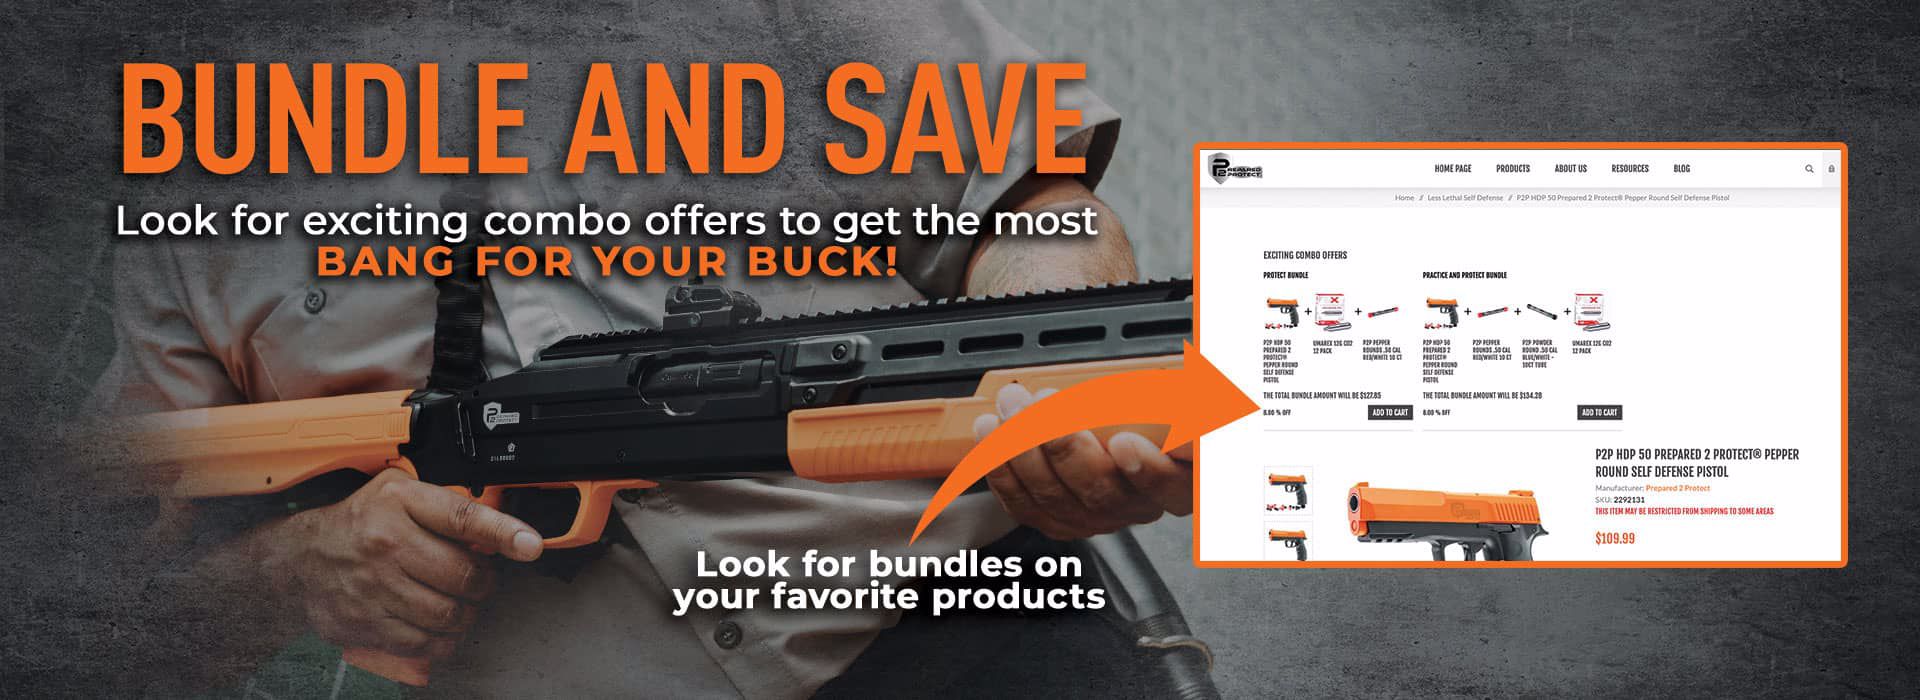 Bundle and Save. Look for exciting combo offers to get the most bang for your buck! Look for bundles on your favorite products.